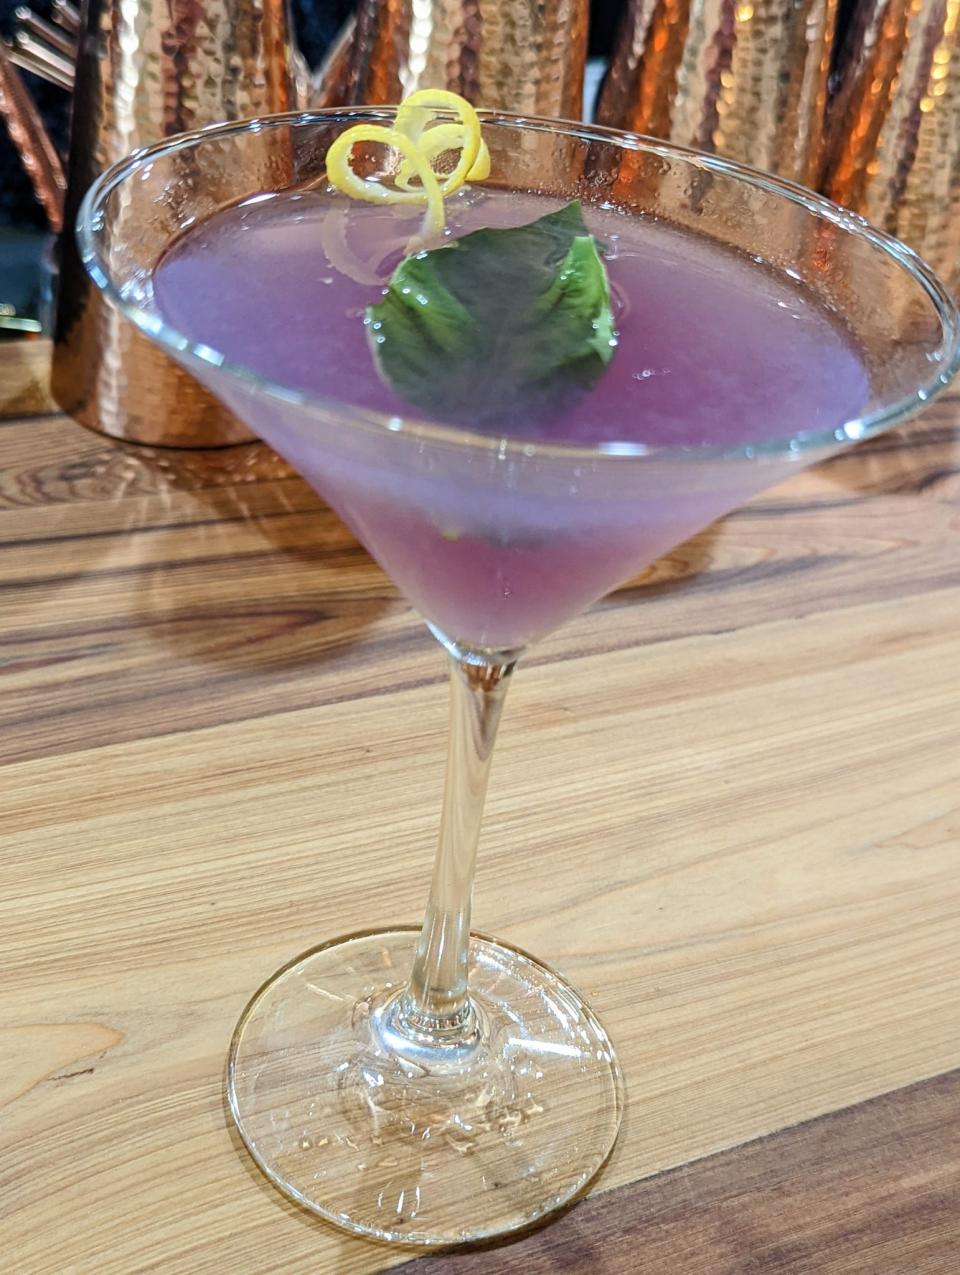 The Empress Martini is among the cocktails served at Vine & Olive in Titusville.